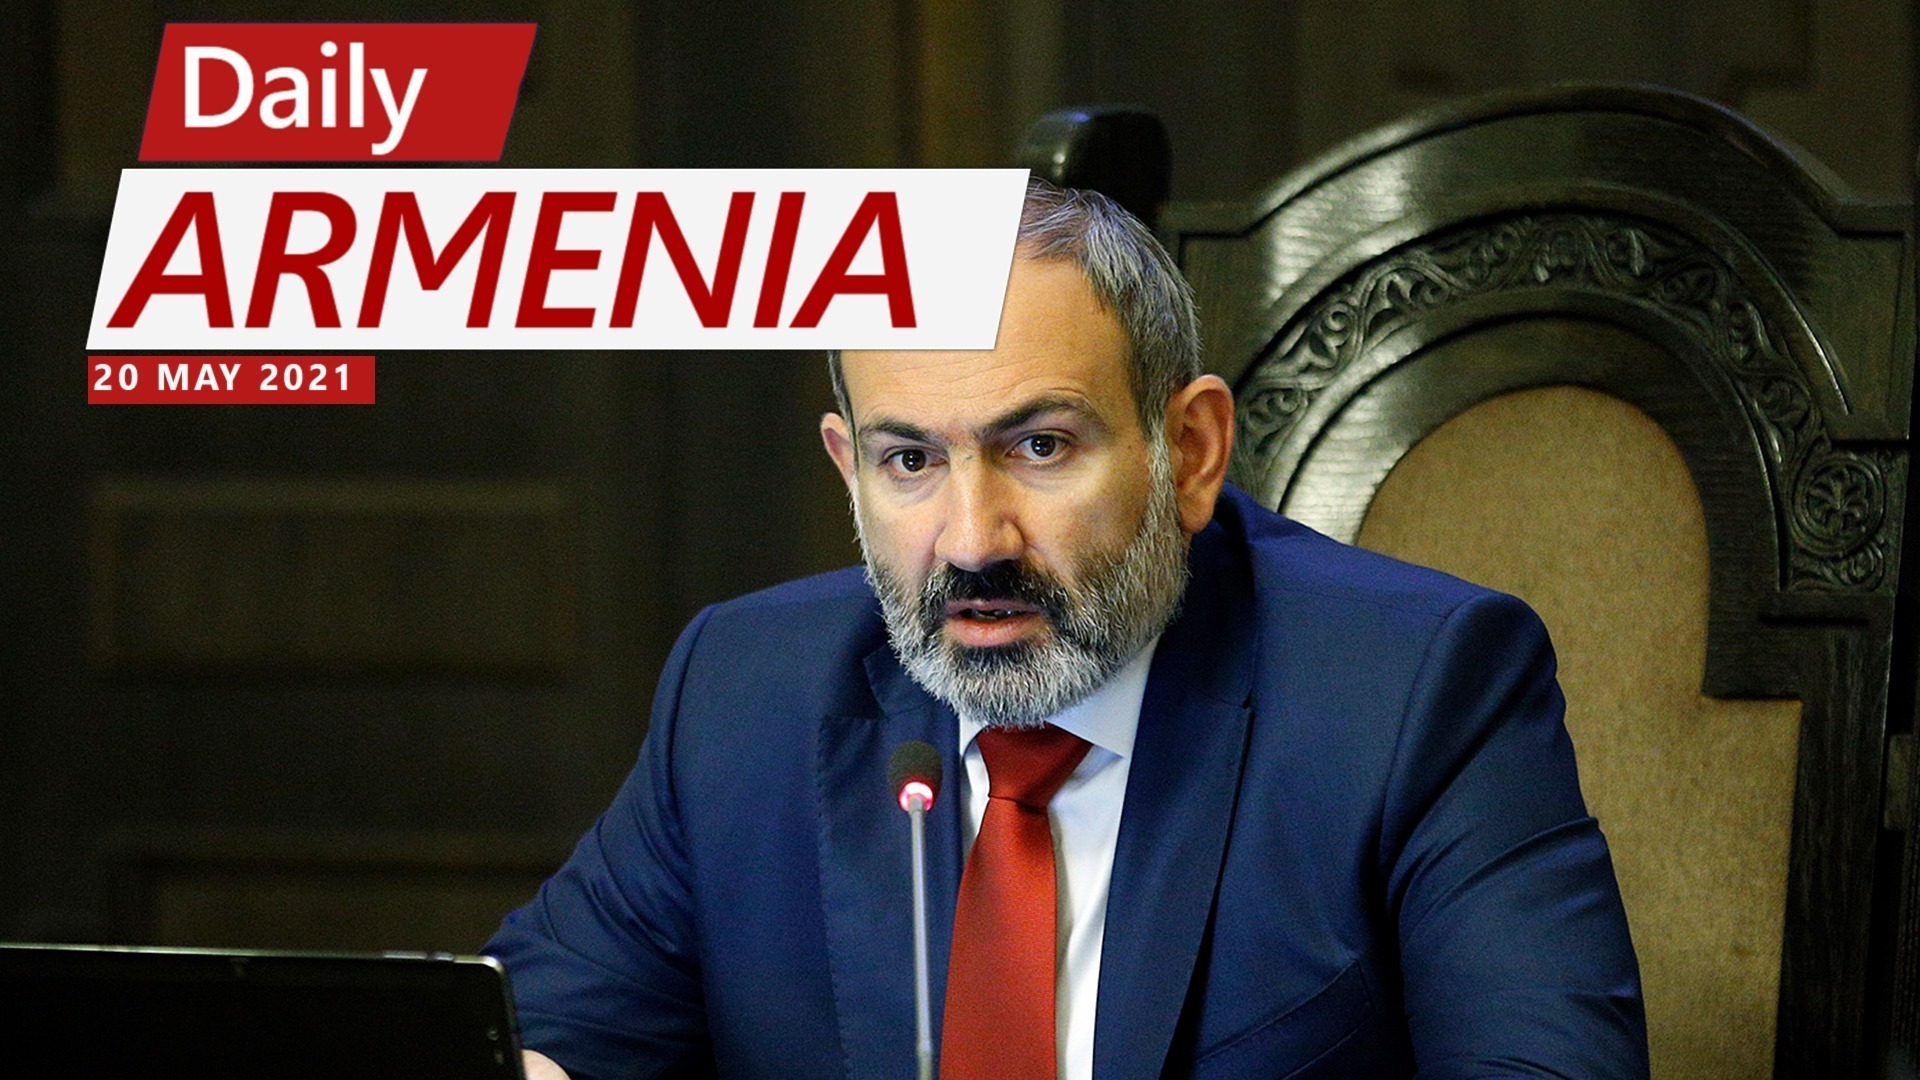 New Agreement In the Works Between Armenia and Azerbaijan